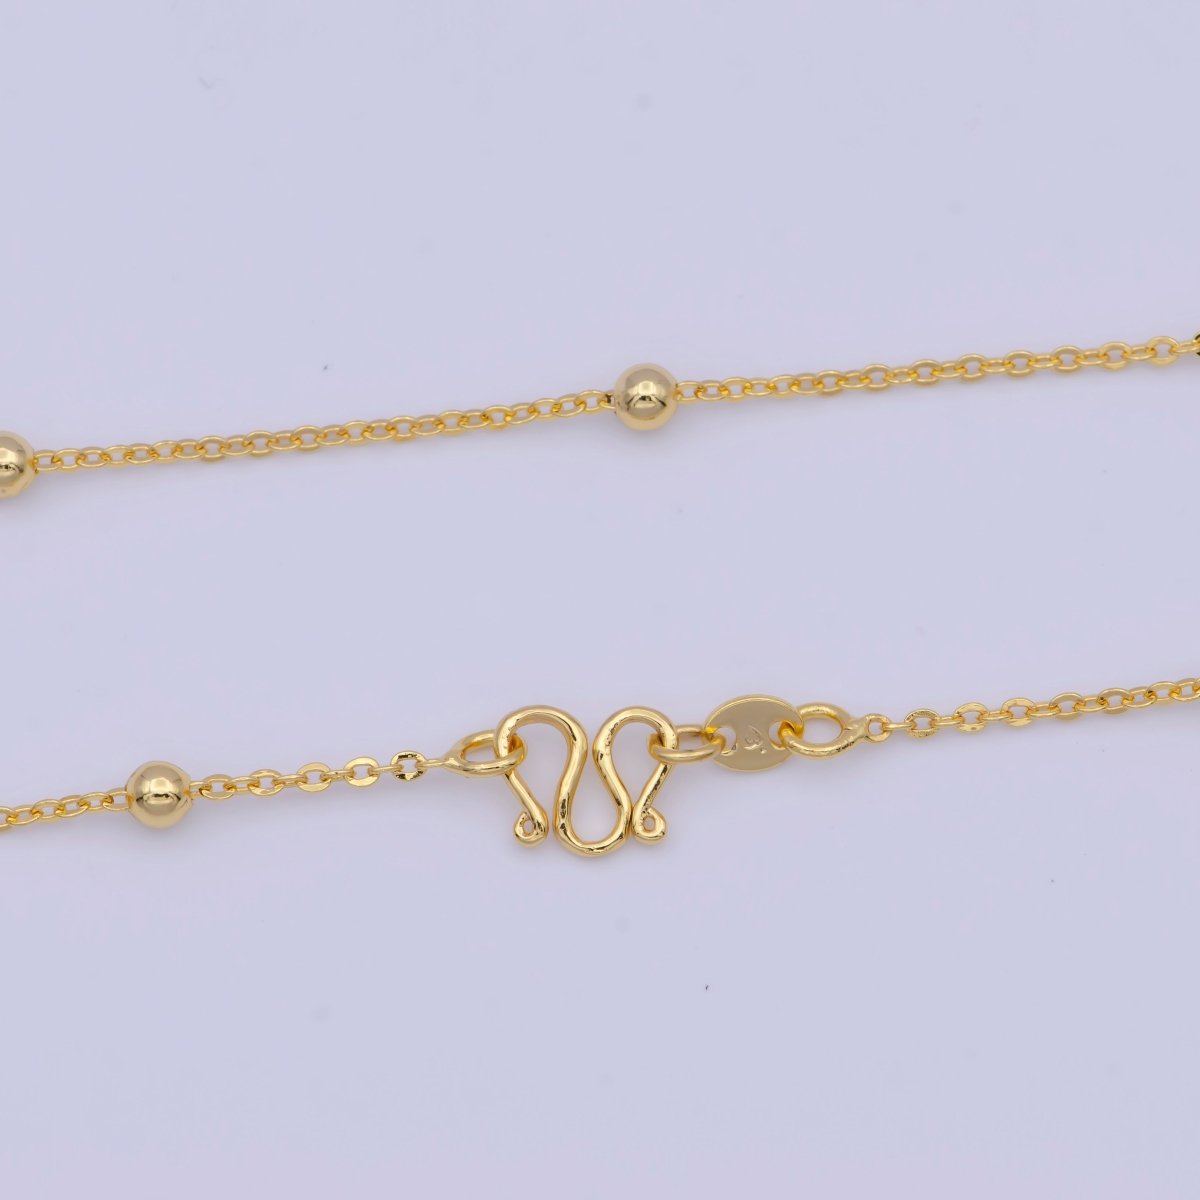 Beaded Chain Gold Satellite Necklace, Dainty Beaded Necklace, Layering Beaded Chain, Delicate Necklace Ready to Wear with W Clasp | WA-1131 Clearance Pricing - DLUXCA